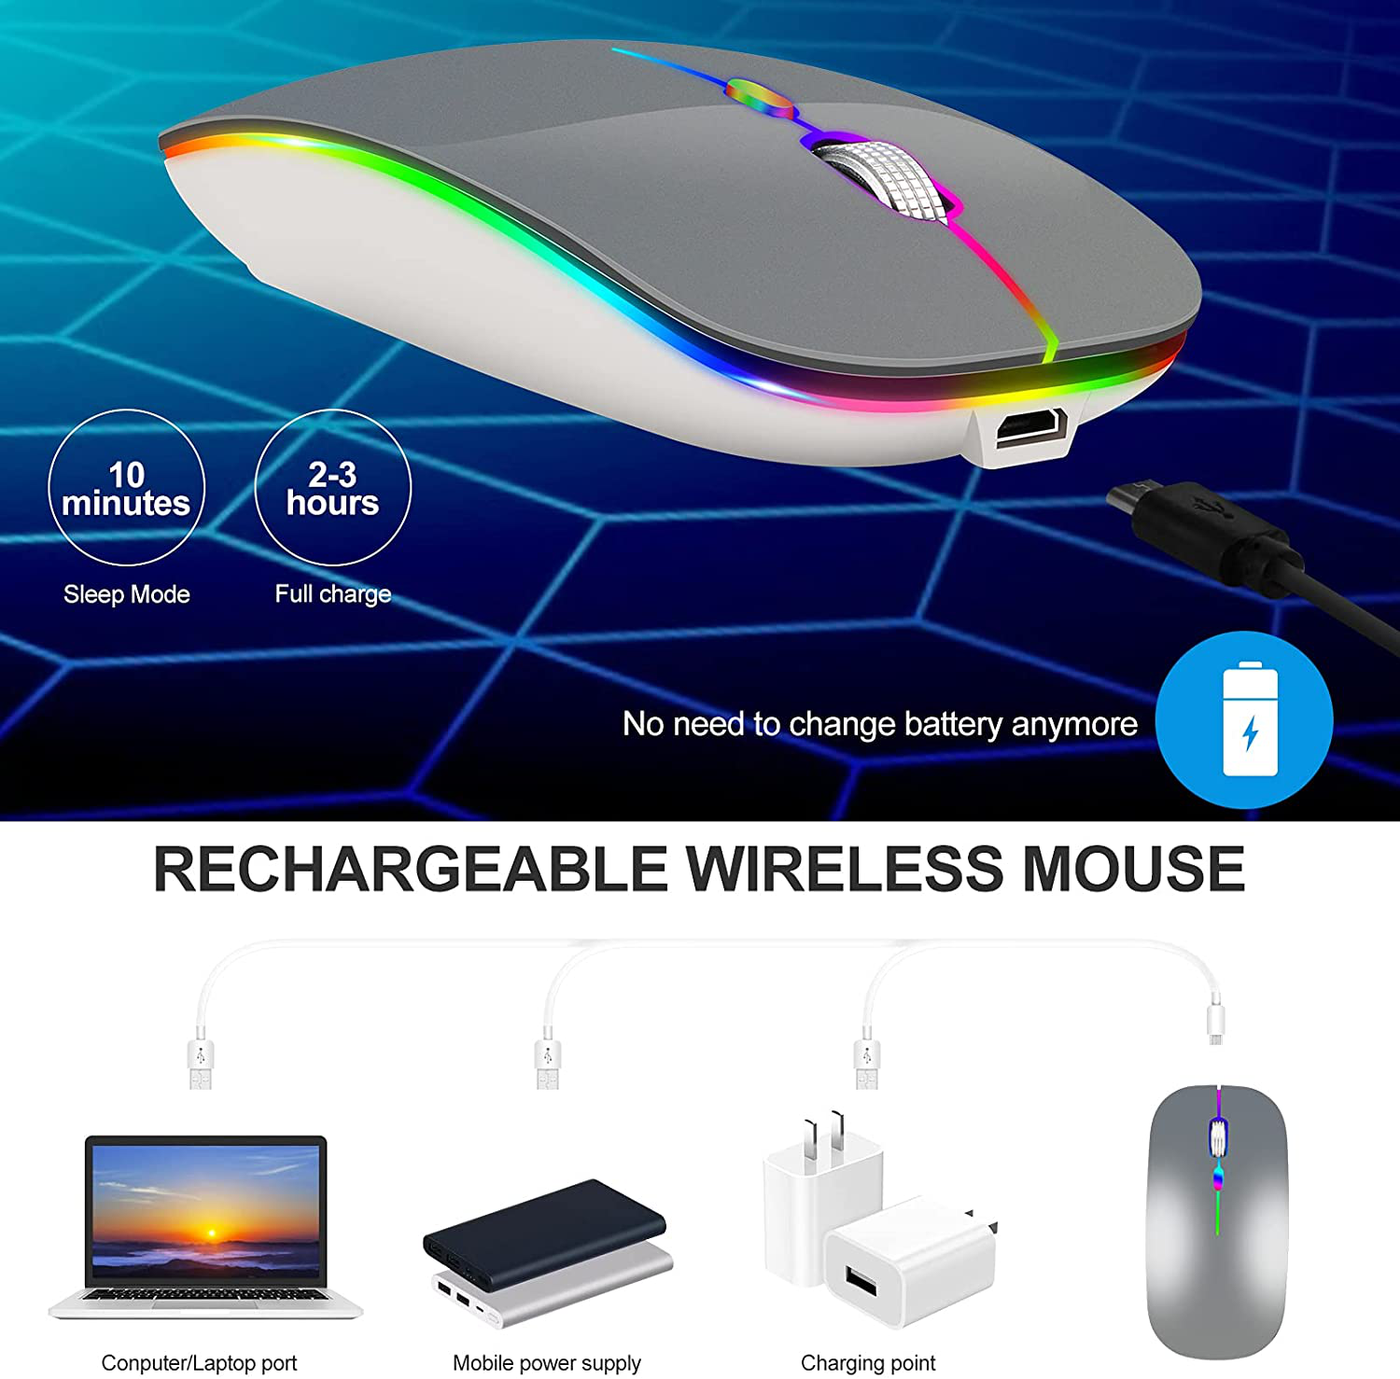 LED Wireless Mouse for MacBook air/MacBook pro/Laptops/Windows/Mac,Rechargeable Slim Silent Mouse 2.4G USB/Type-c Receiver,Rechargeable Wireless Mouse for MacBook/air/pro/mac/pc(Grey)